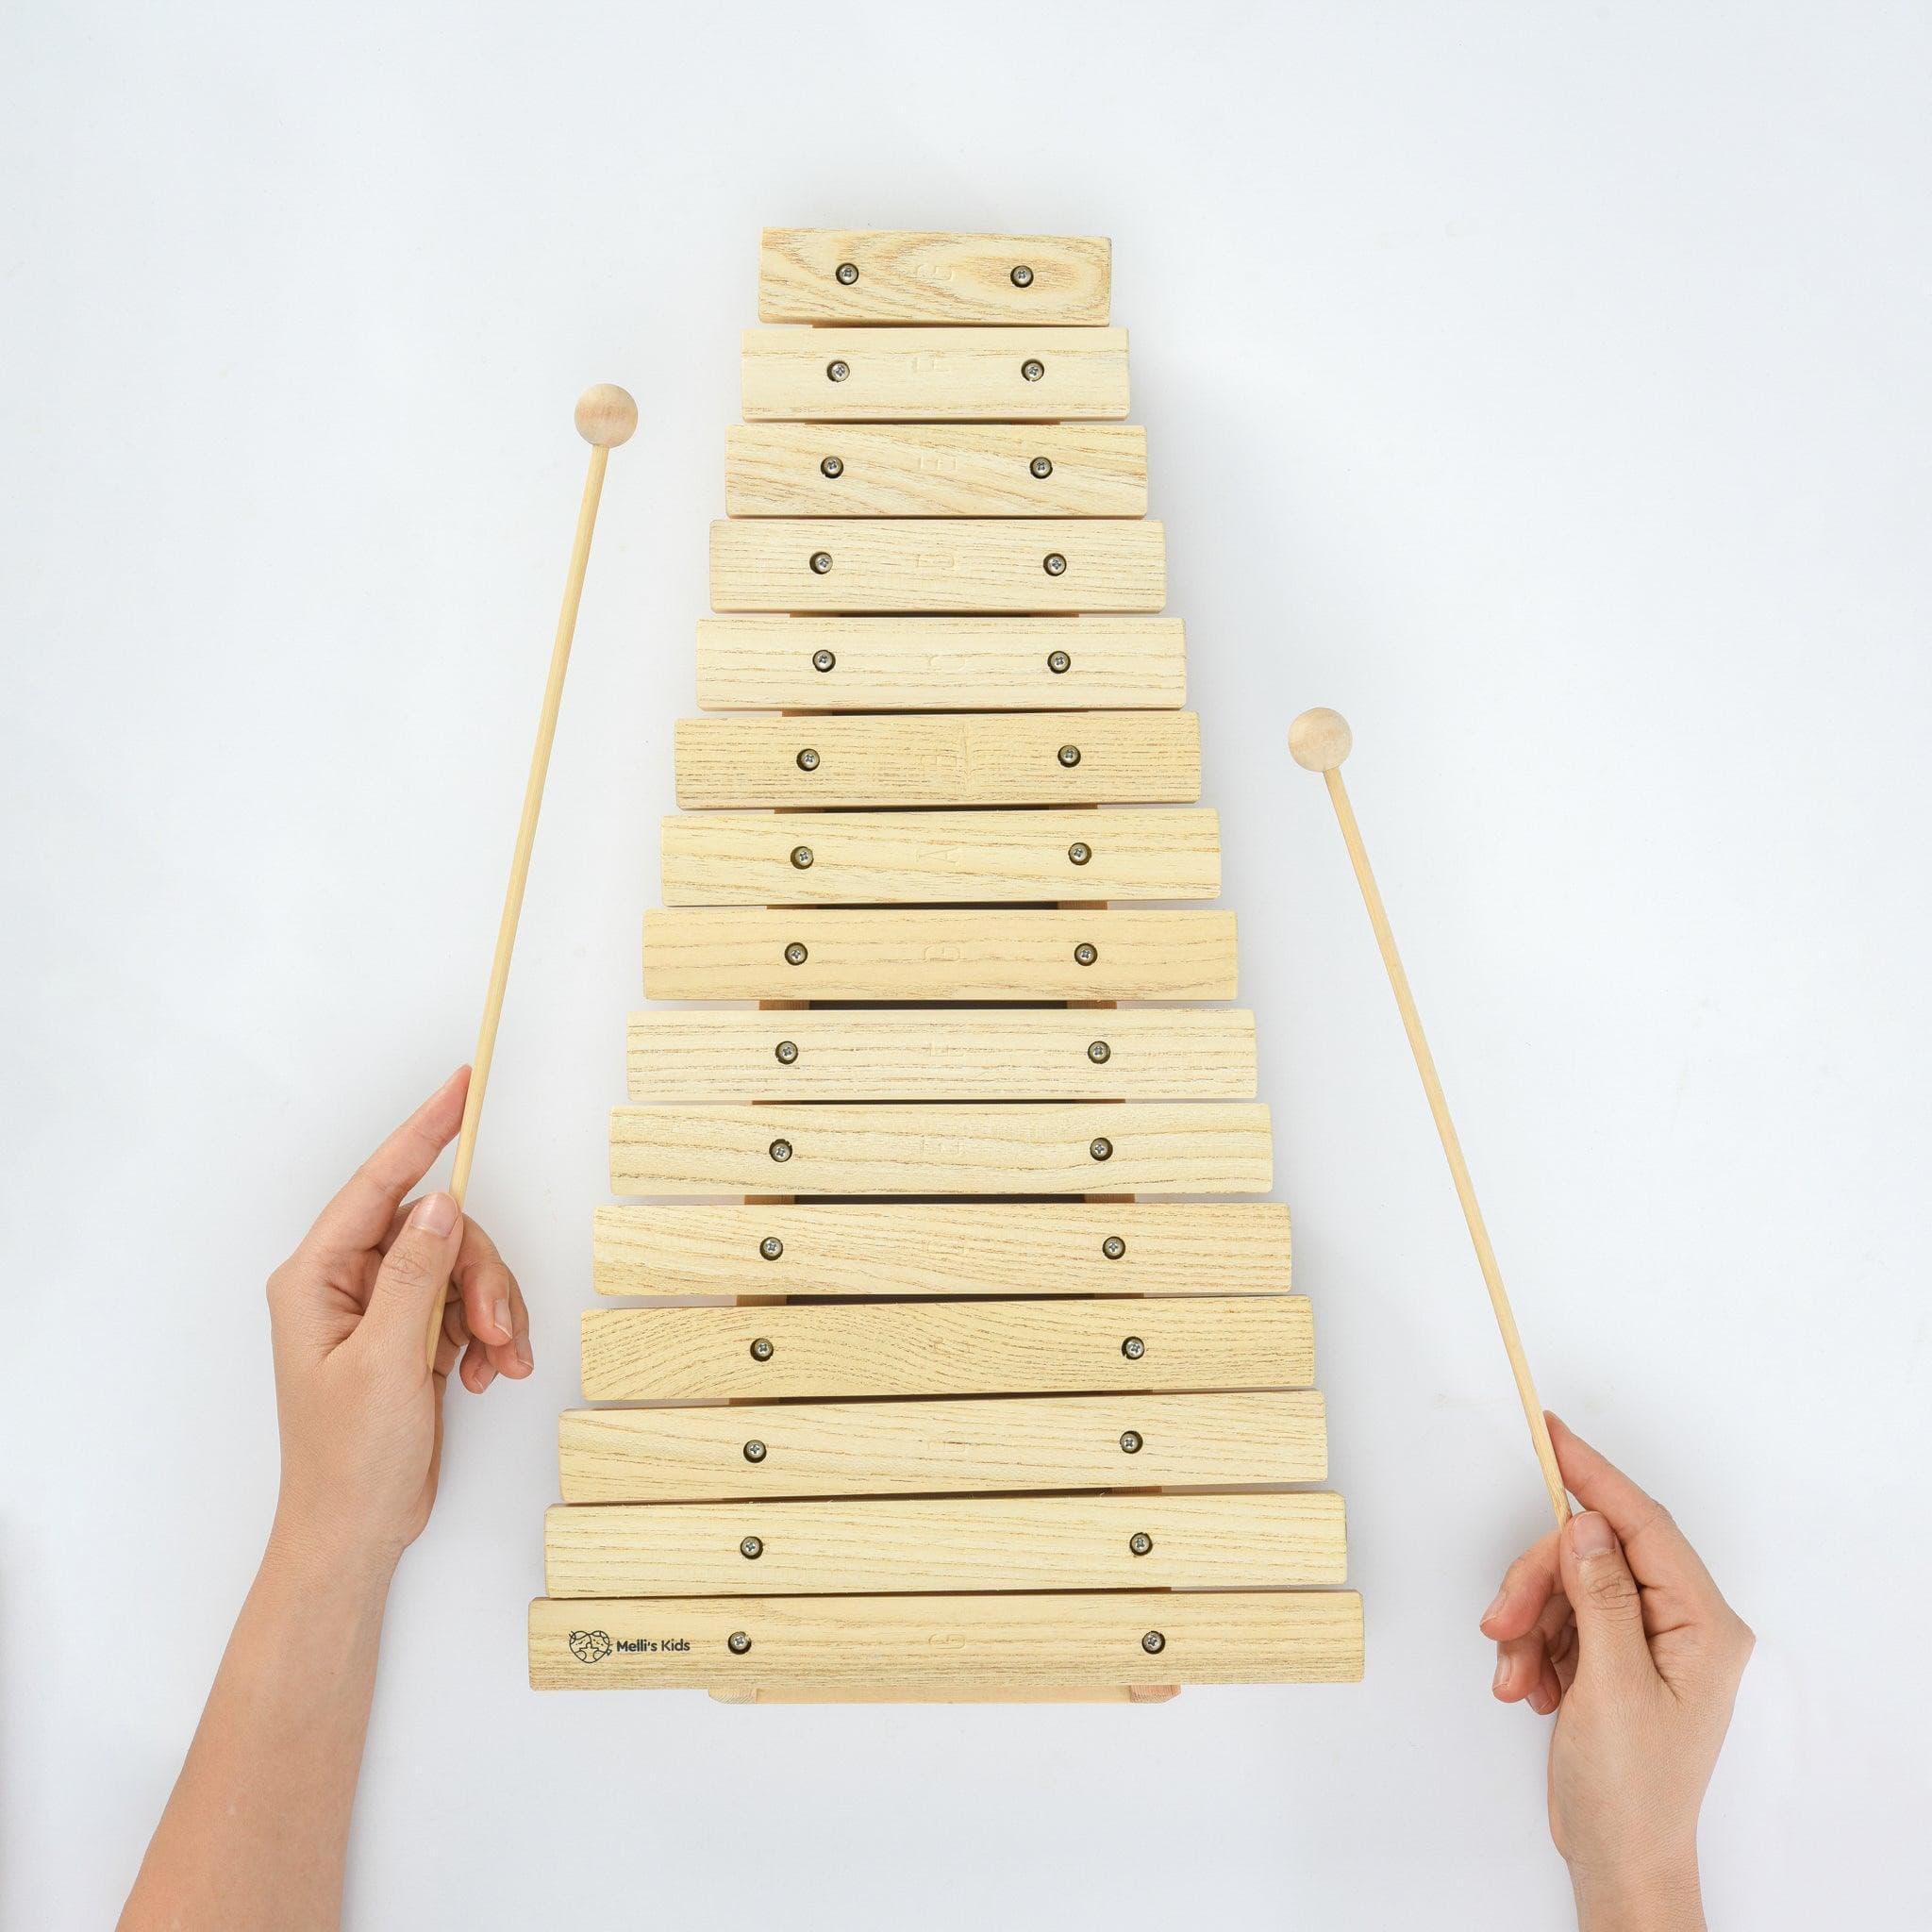 Melli's Kids Xylophone (Natural Wooden Toy)